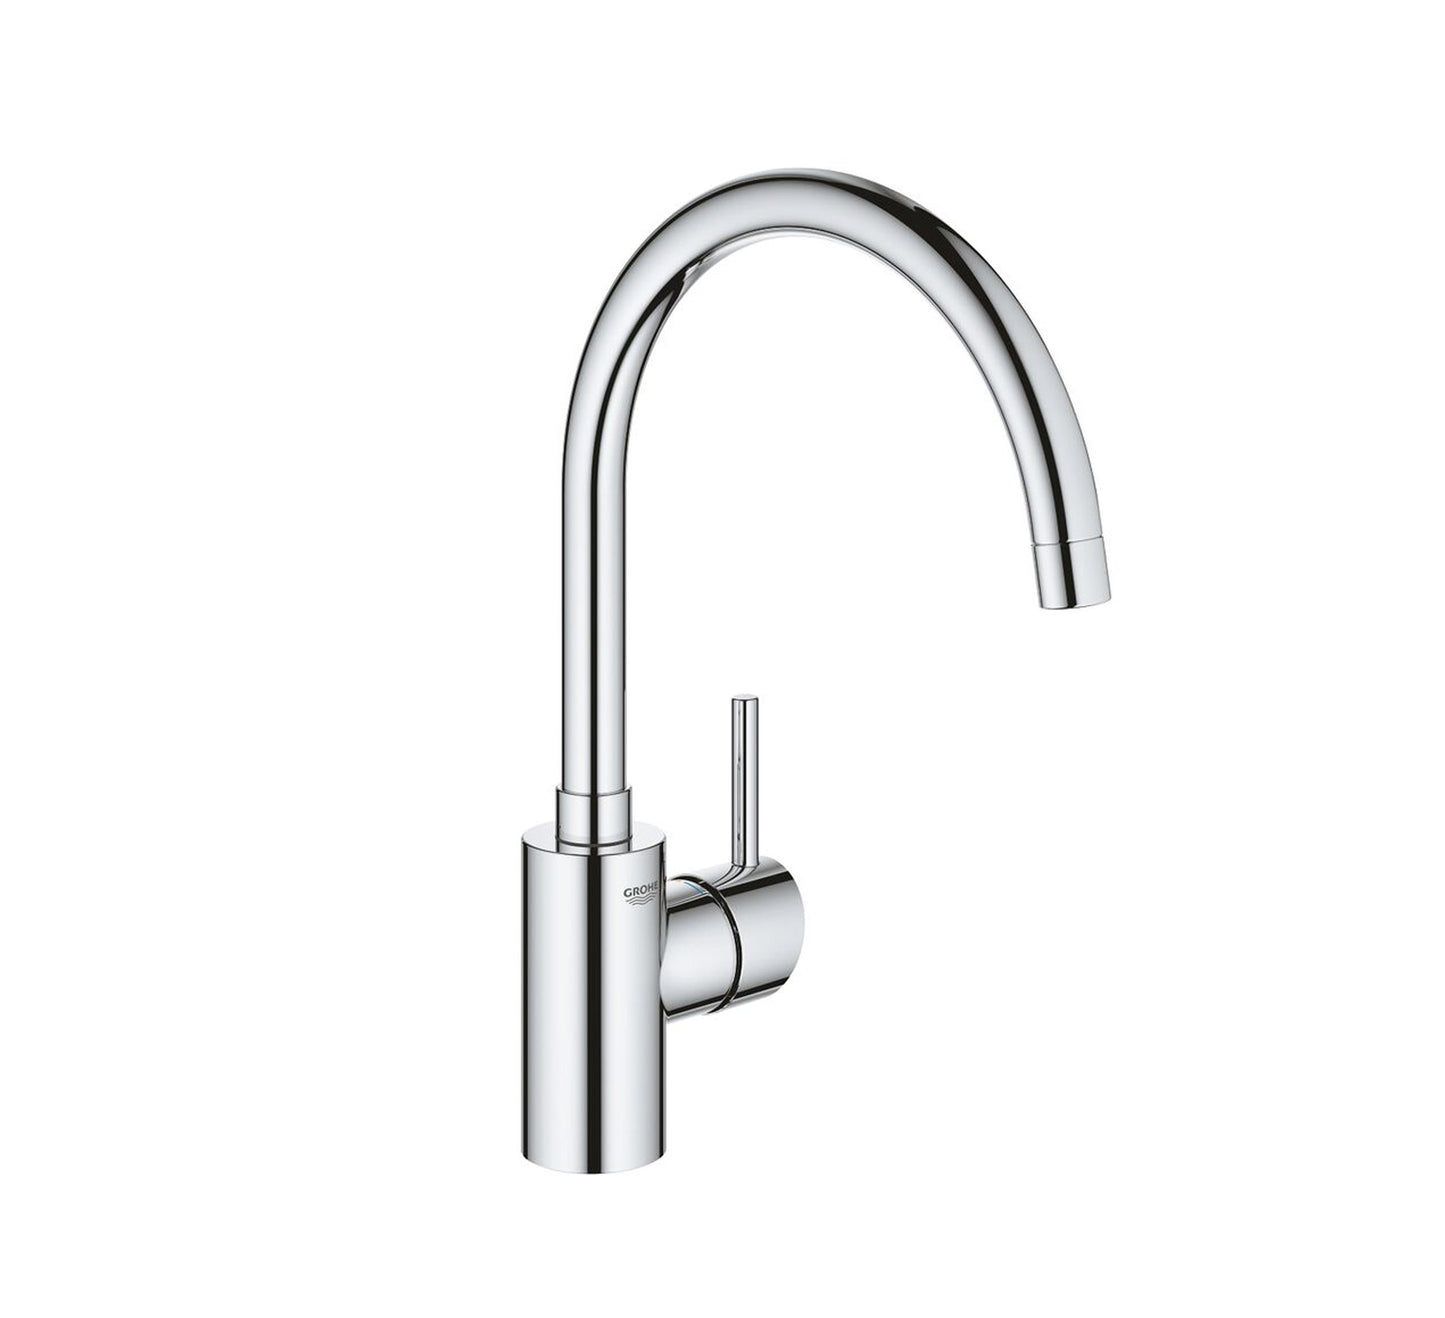 GROHE CONCETTO SINK MIXER C SPOUT - 32661003 - تدمر للتجارة